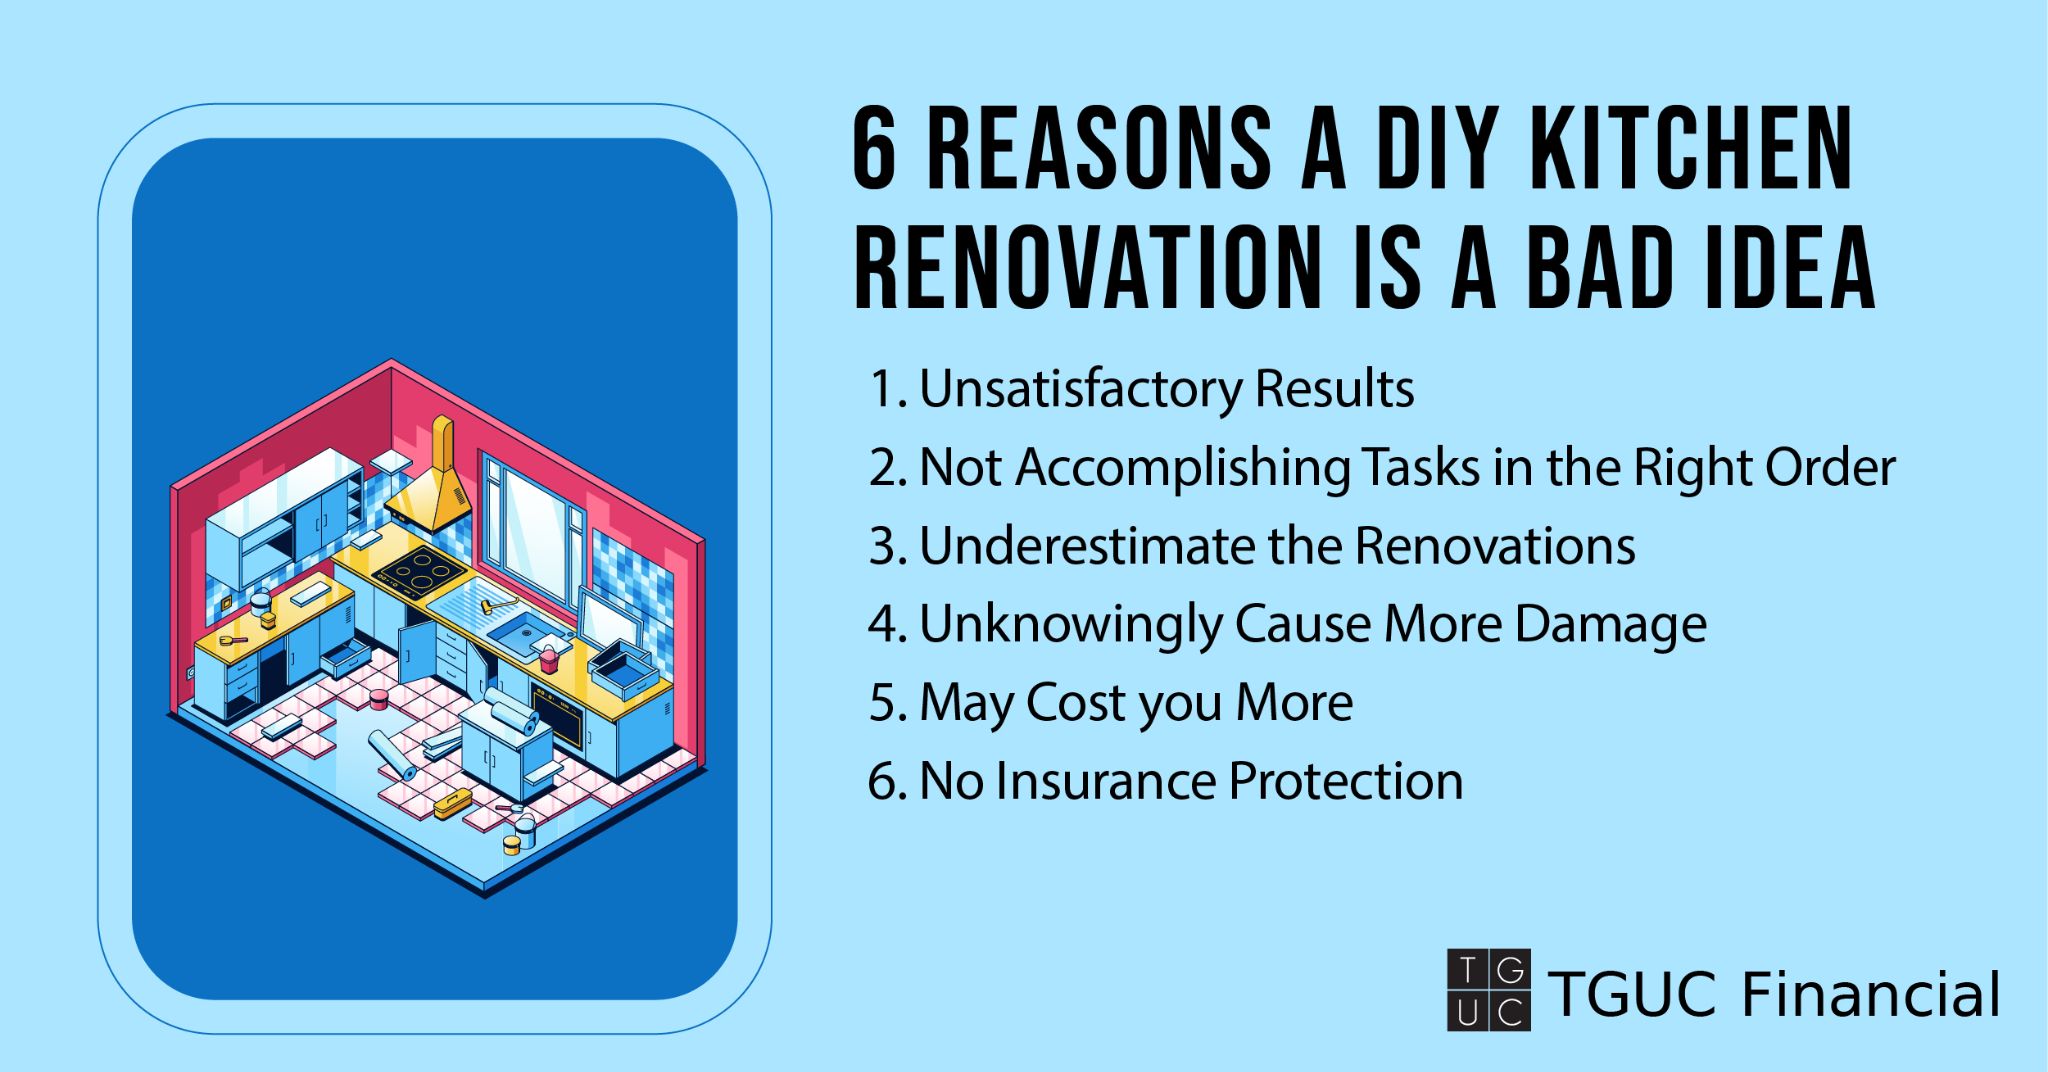 A summary of the 6 reasons a DIY kitchen renovation is a bad idea.